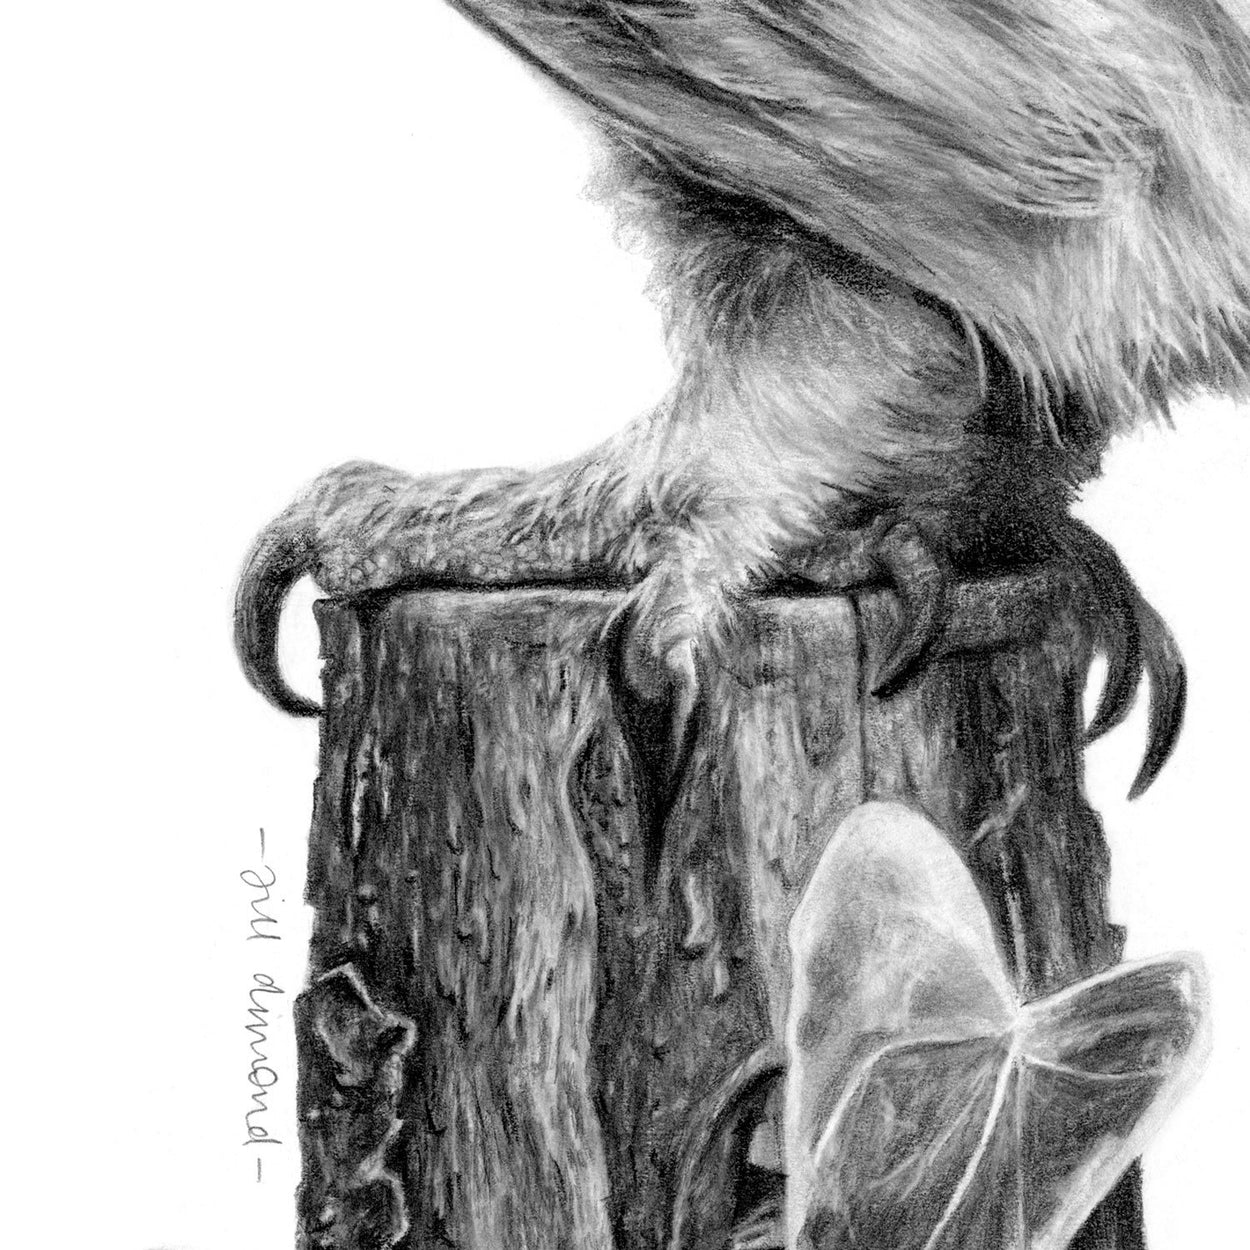 Little Owl Drawing Foot Close-up - The Thriving Wild